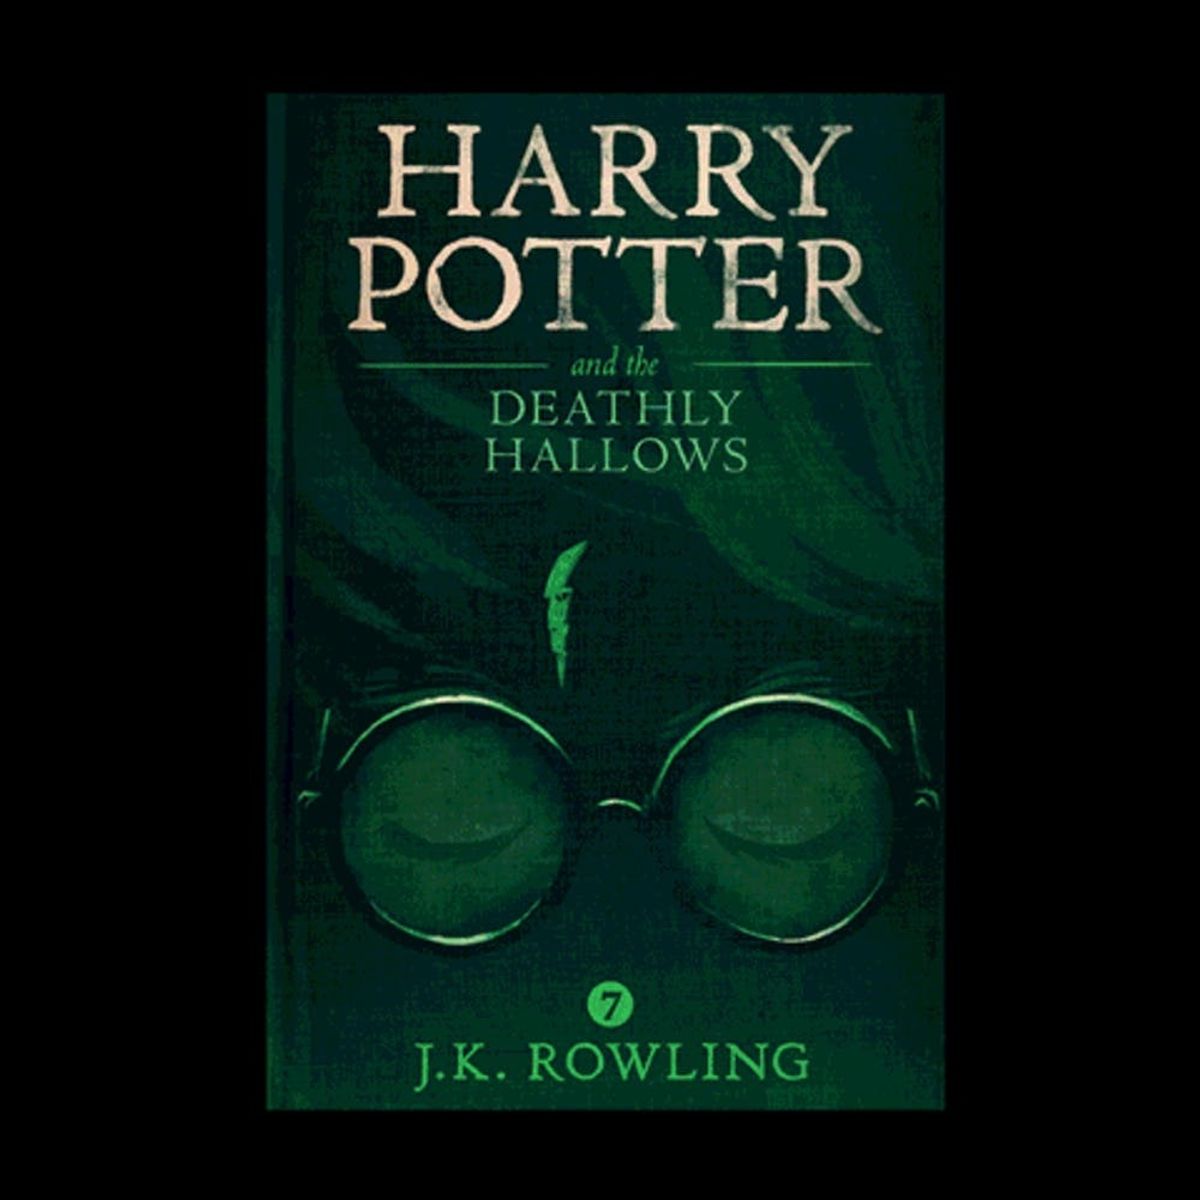 The New Harry Potter Covers Will Make You Want to Read the Series All Over Again